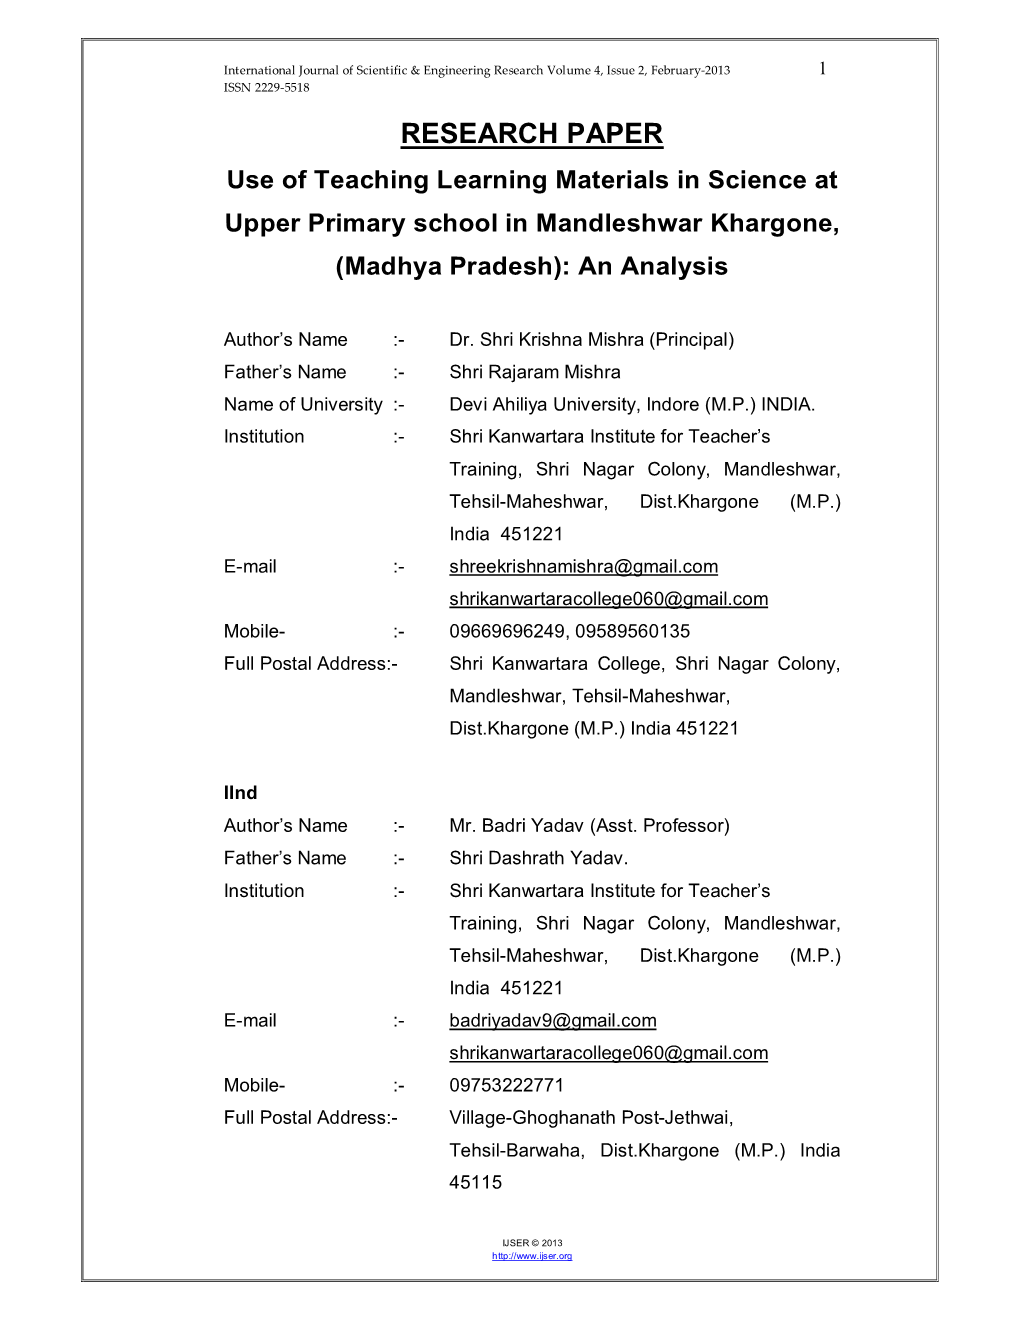 Use of Teaching Learning Materials in Science at Upper Primary School in Mandleshwar Khargone, (Madhya Pradesh): an Analysis